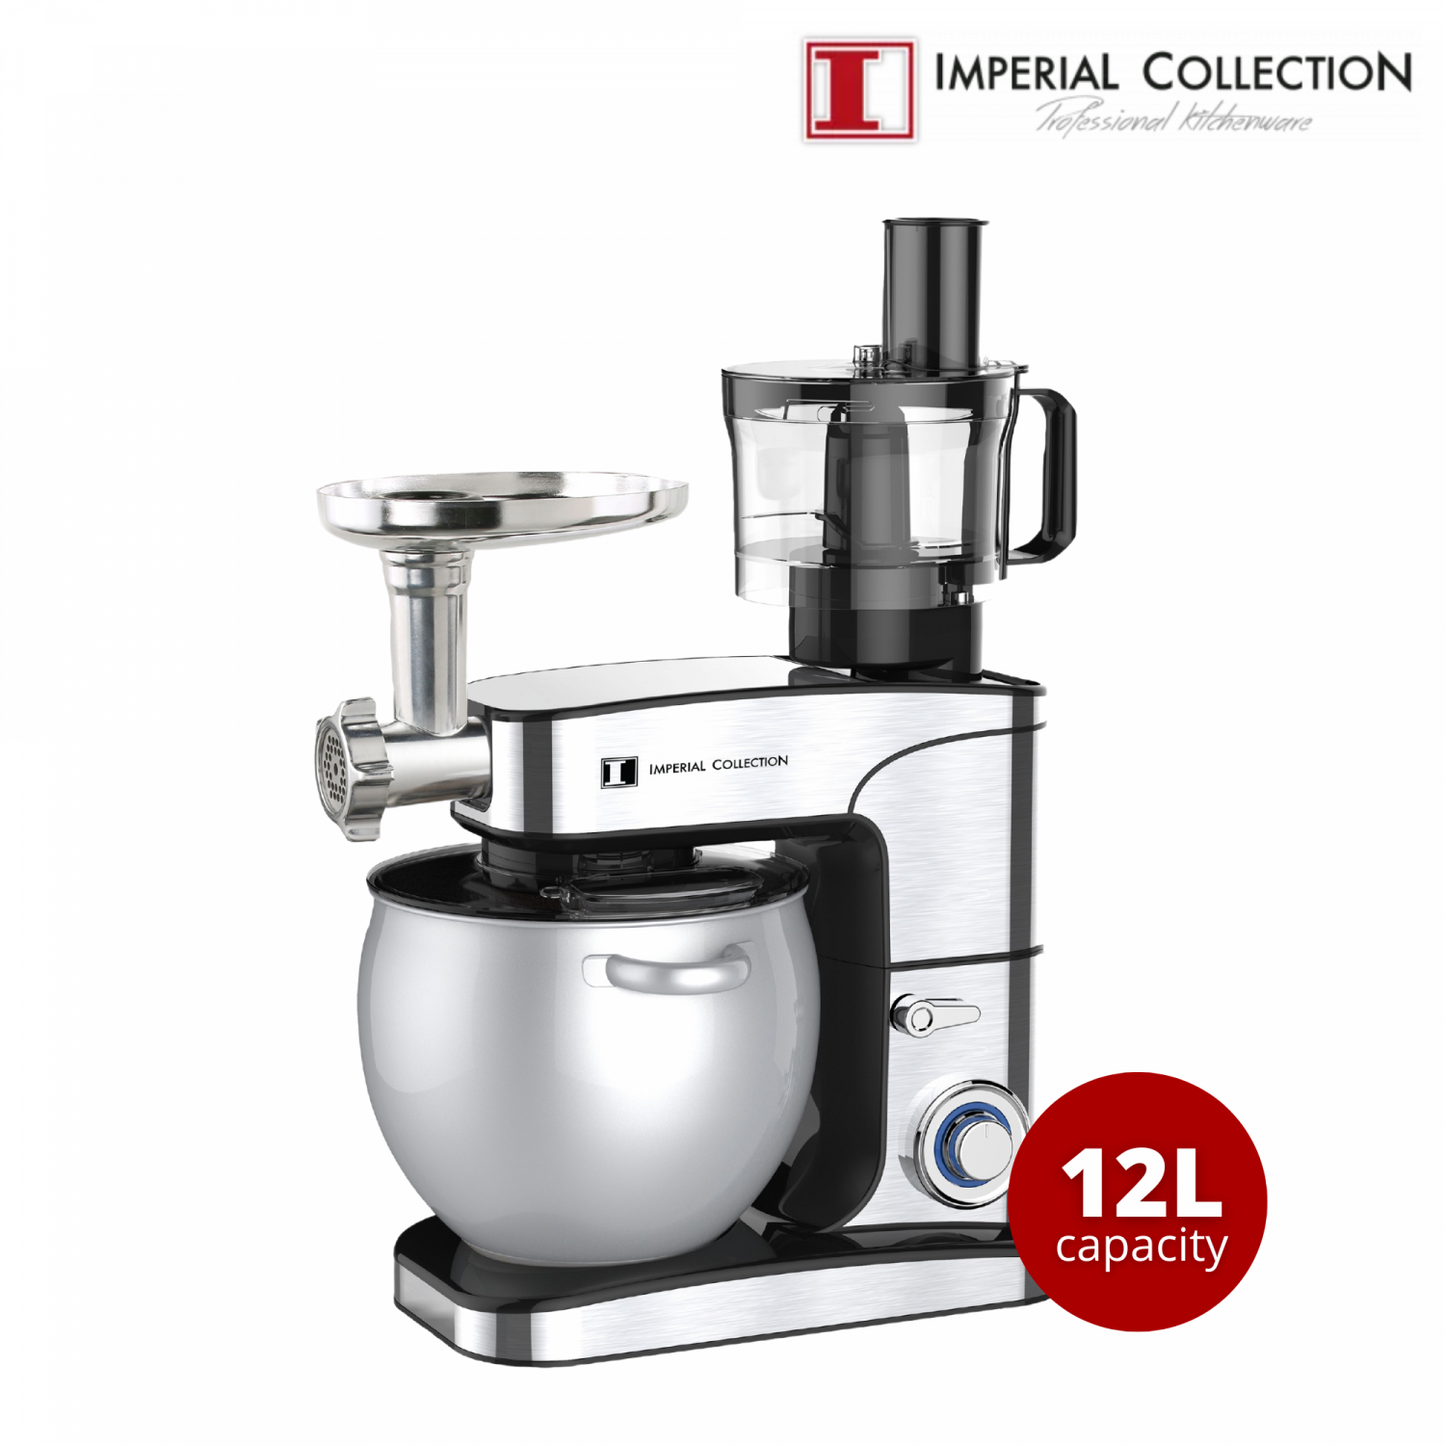 Imperial Collection Multifunctional Stand Mixer, Meat Grinder, and Citrus Juicer